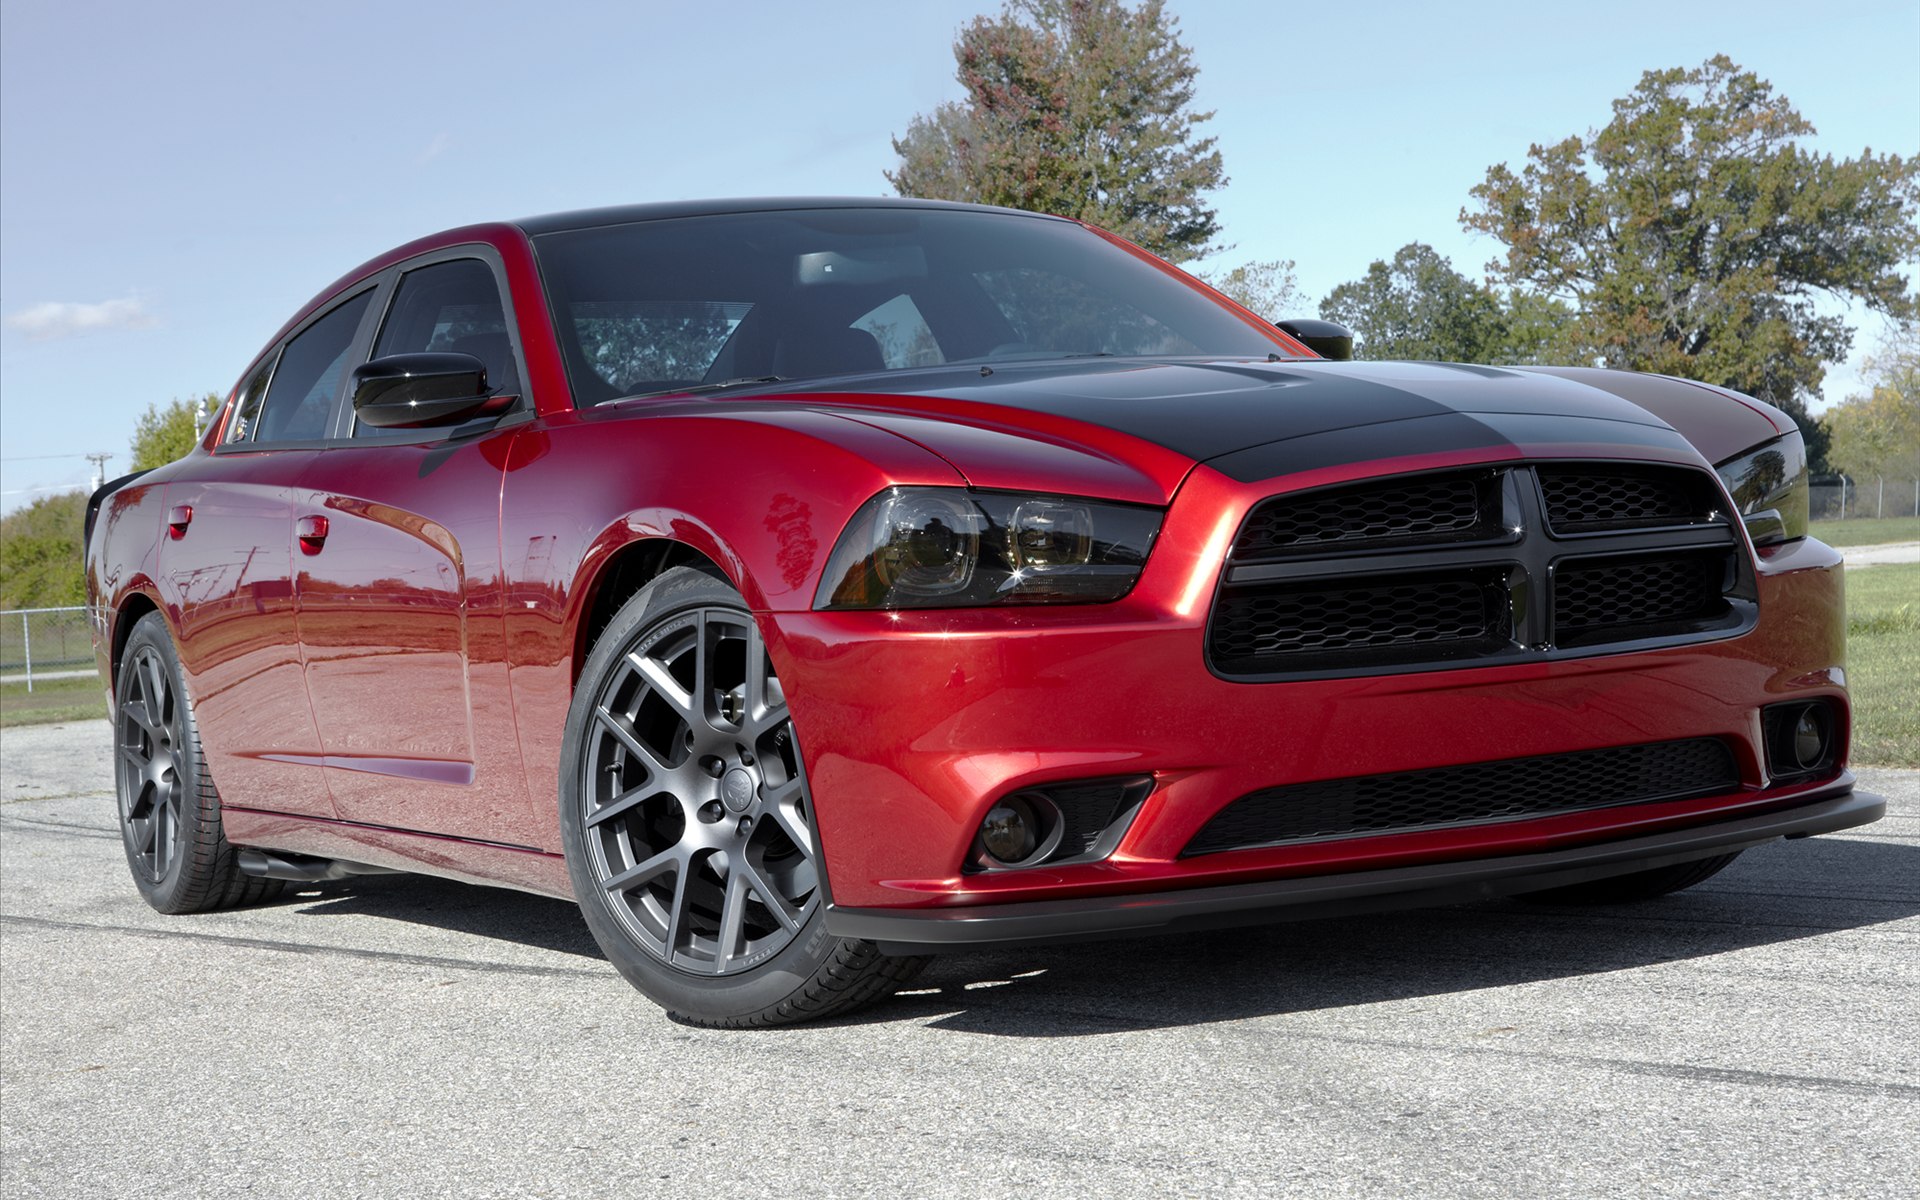 Dark Red Dodge Charger On The Street 2014 Photo Picture Collection